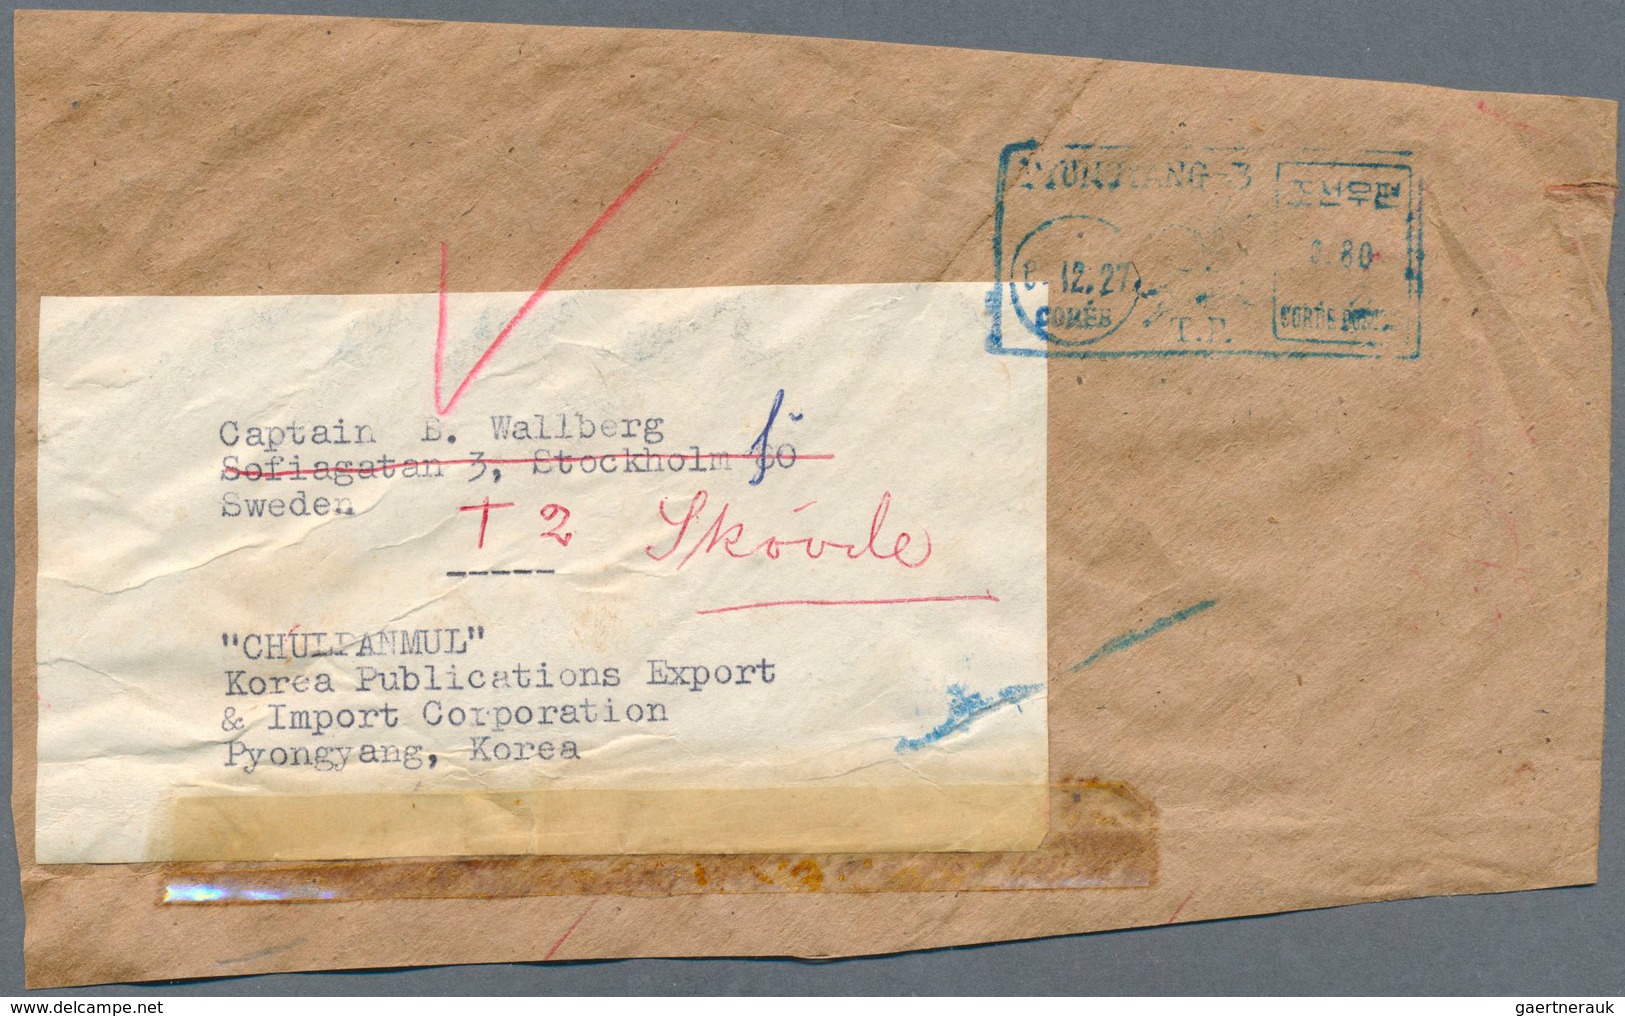 Korea-Nord: 1952/63 (ca.), cut-outs from commercial mail to Sweden inc. front or part-front covers (